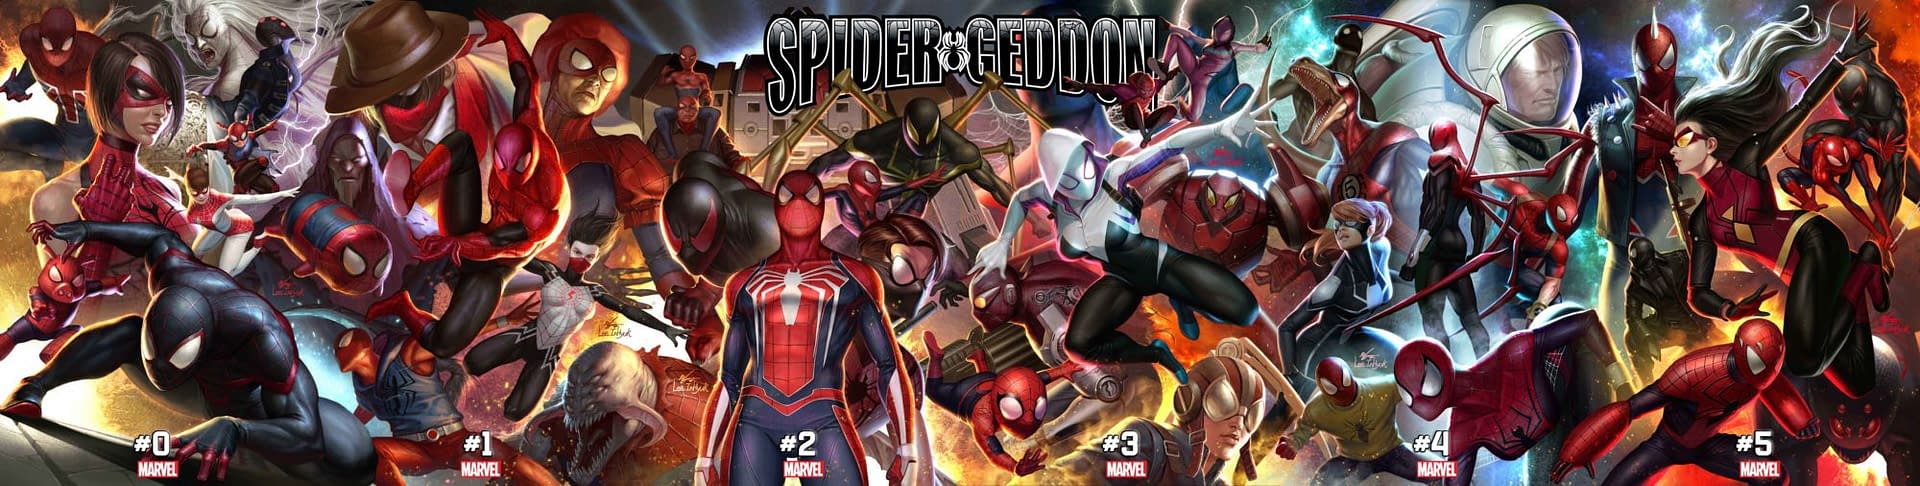 Spider-Persons, Spider-Persons, Everwhere on InHyuk Lee's Spider-Geddon Connecting Variants